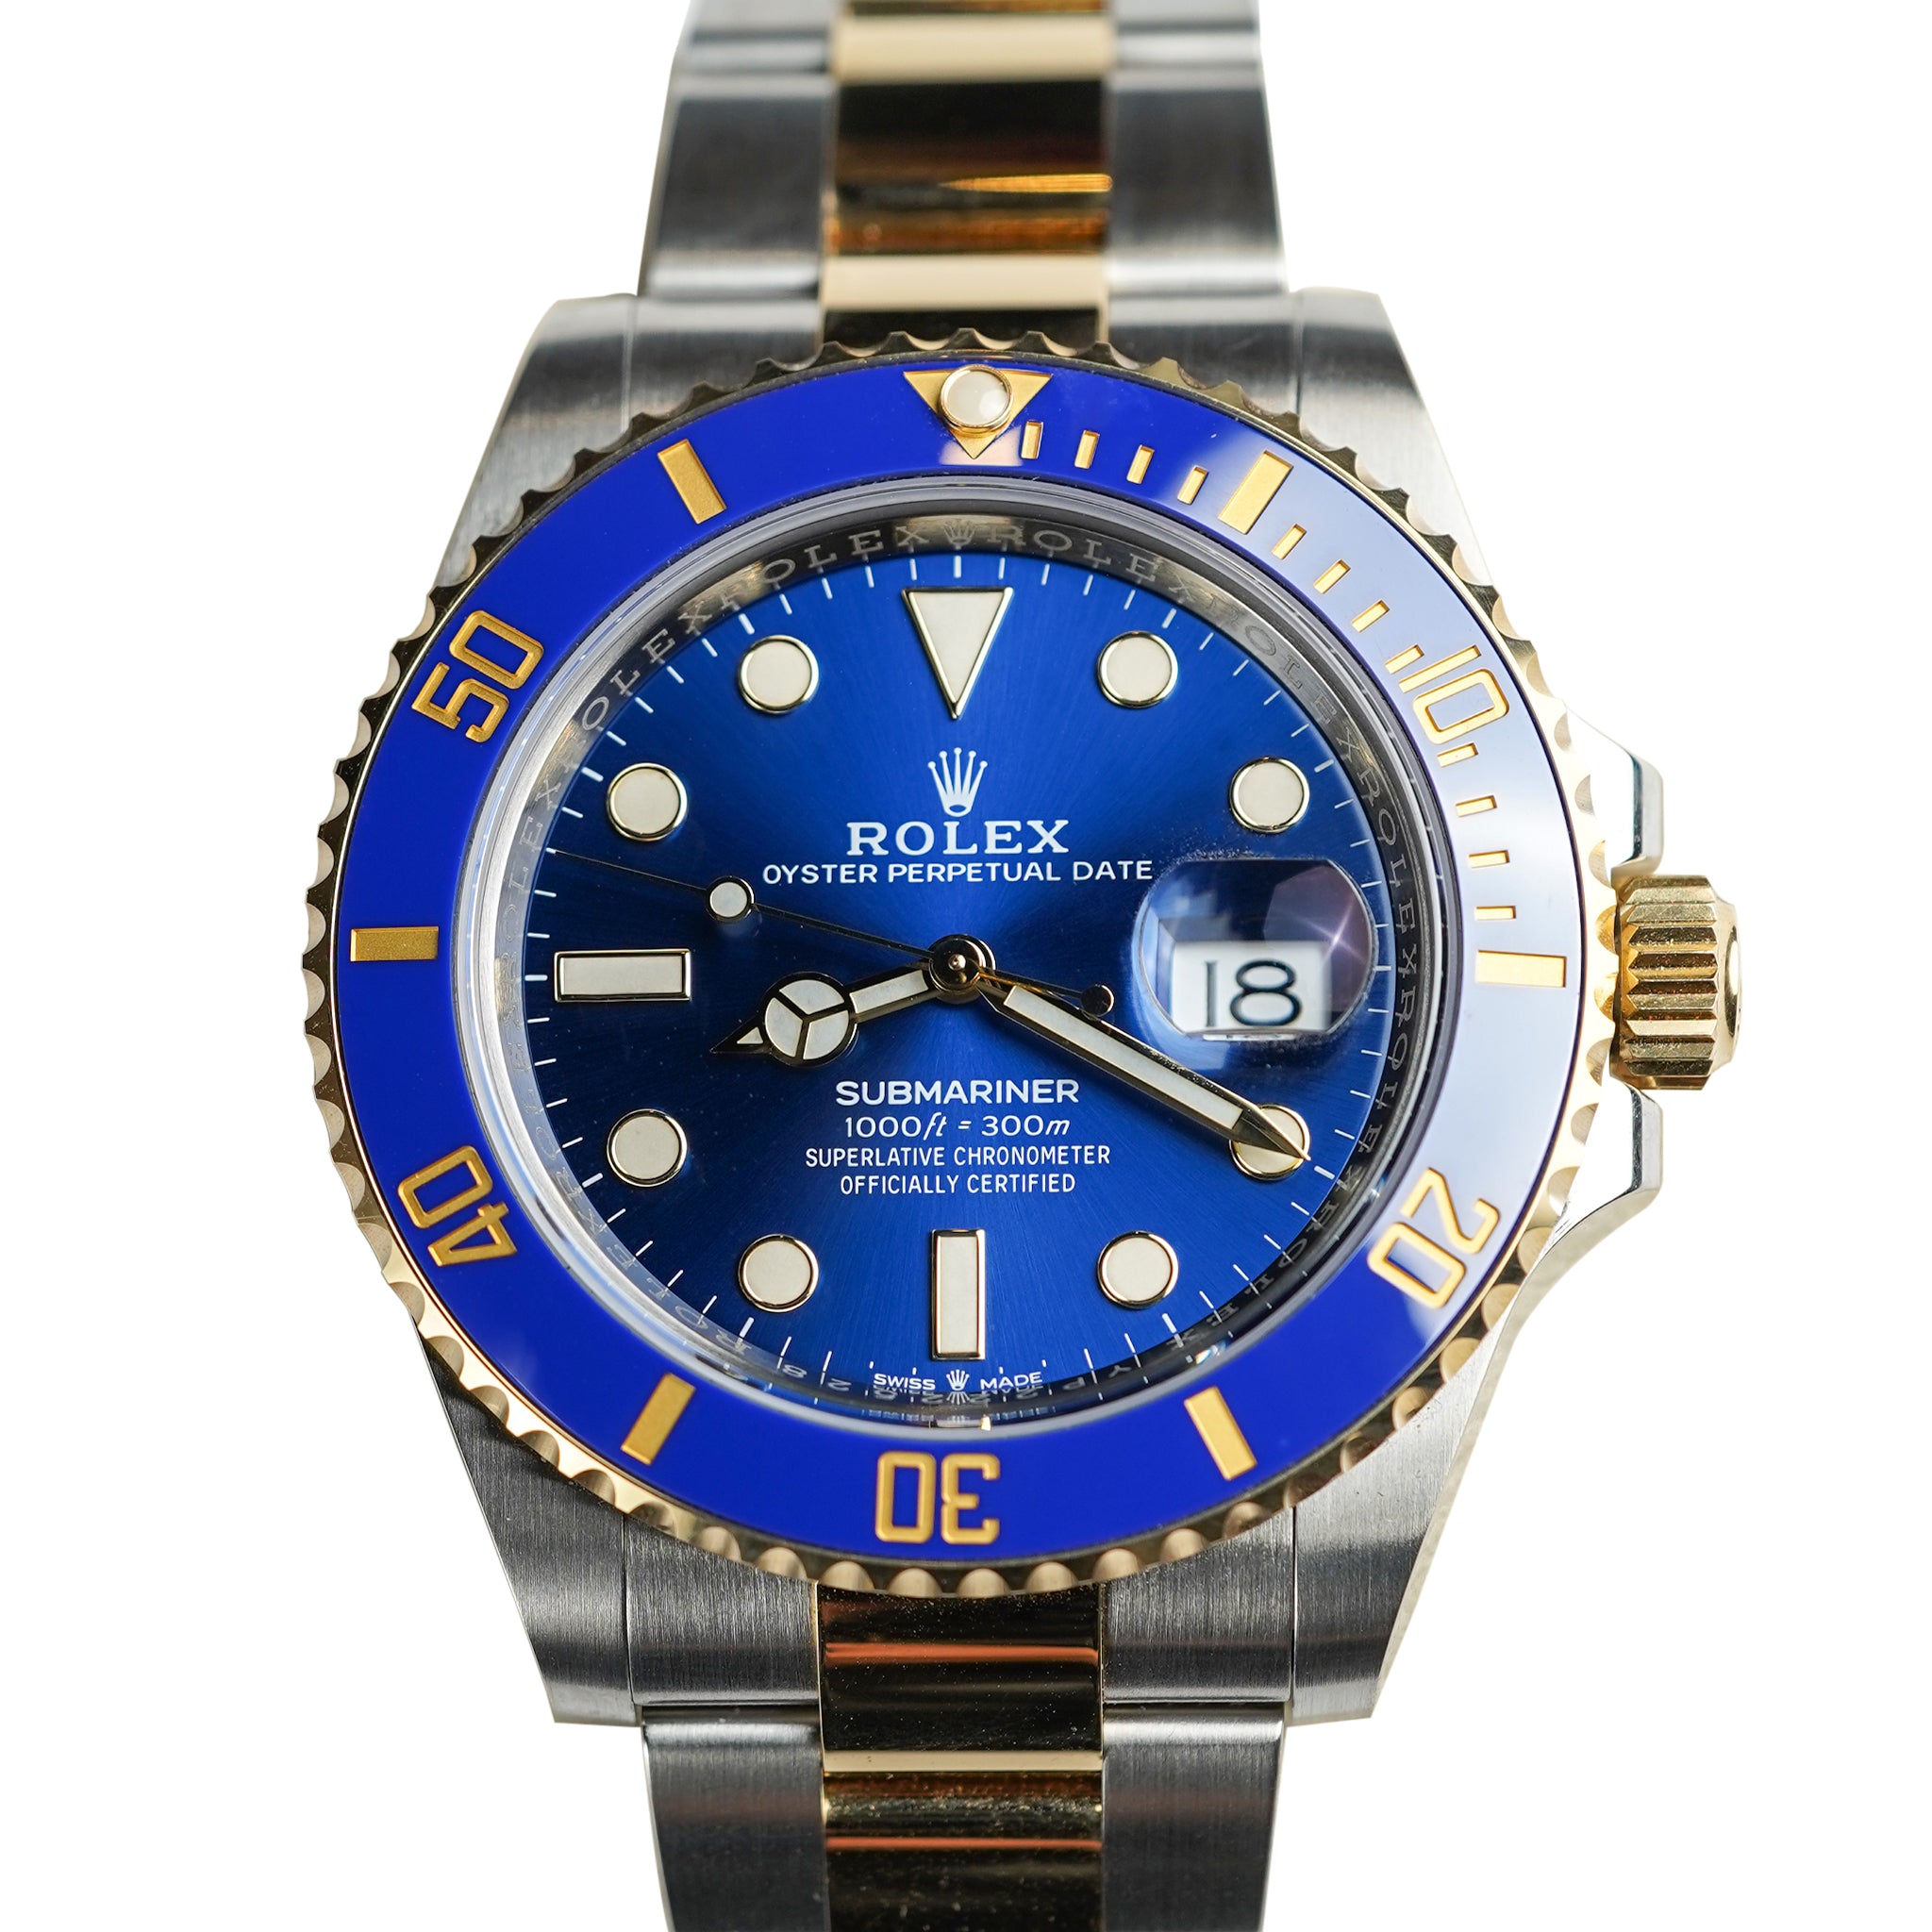 Rolex Submariner Date 41mm Ceramic Two Tone Gold Blue Dial Watch 126613LB